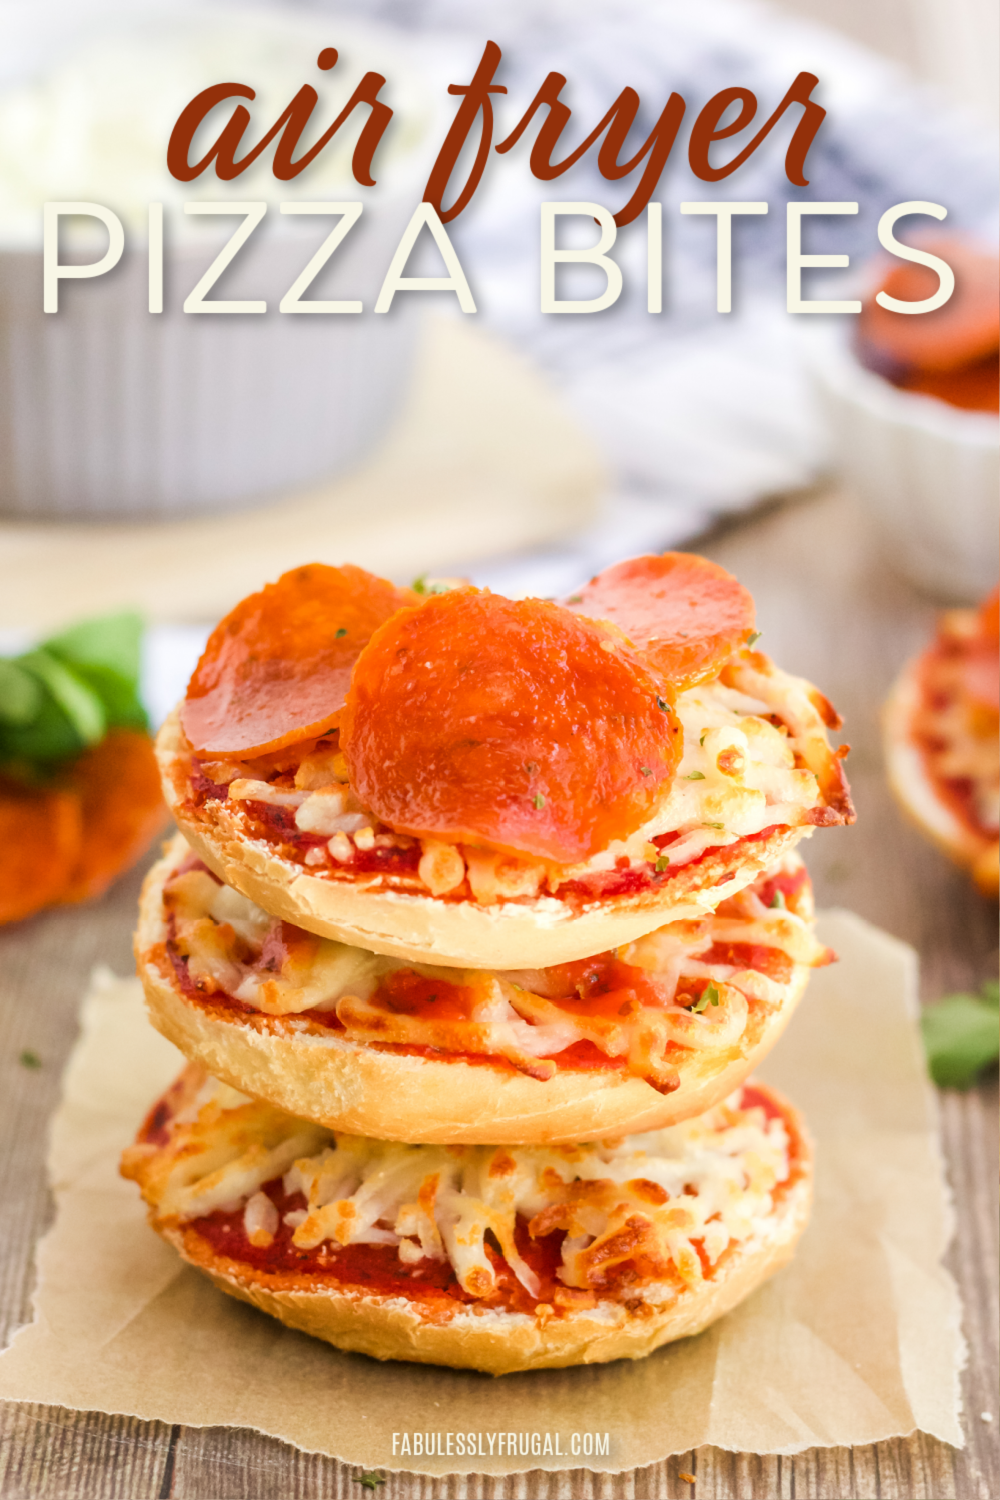 https://fabulesslyfrugal.com/wp-content/uploads/2021/06/mini-air-fryer-pizza-bites.png